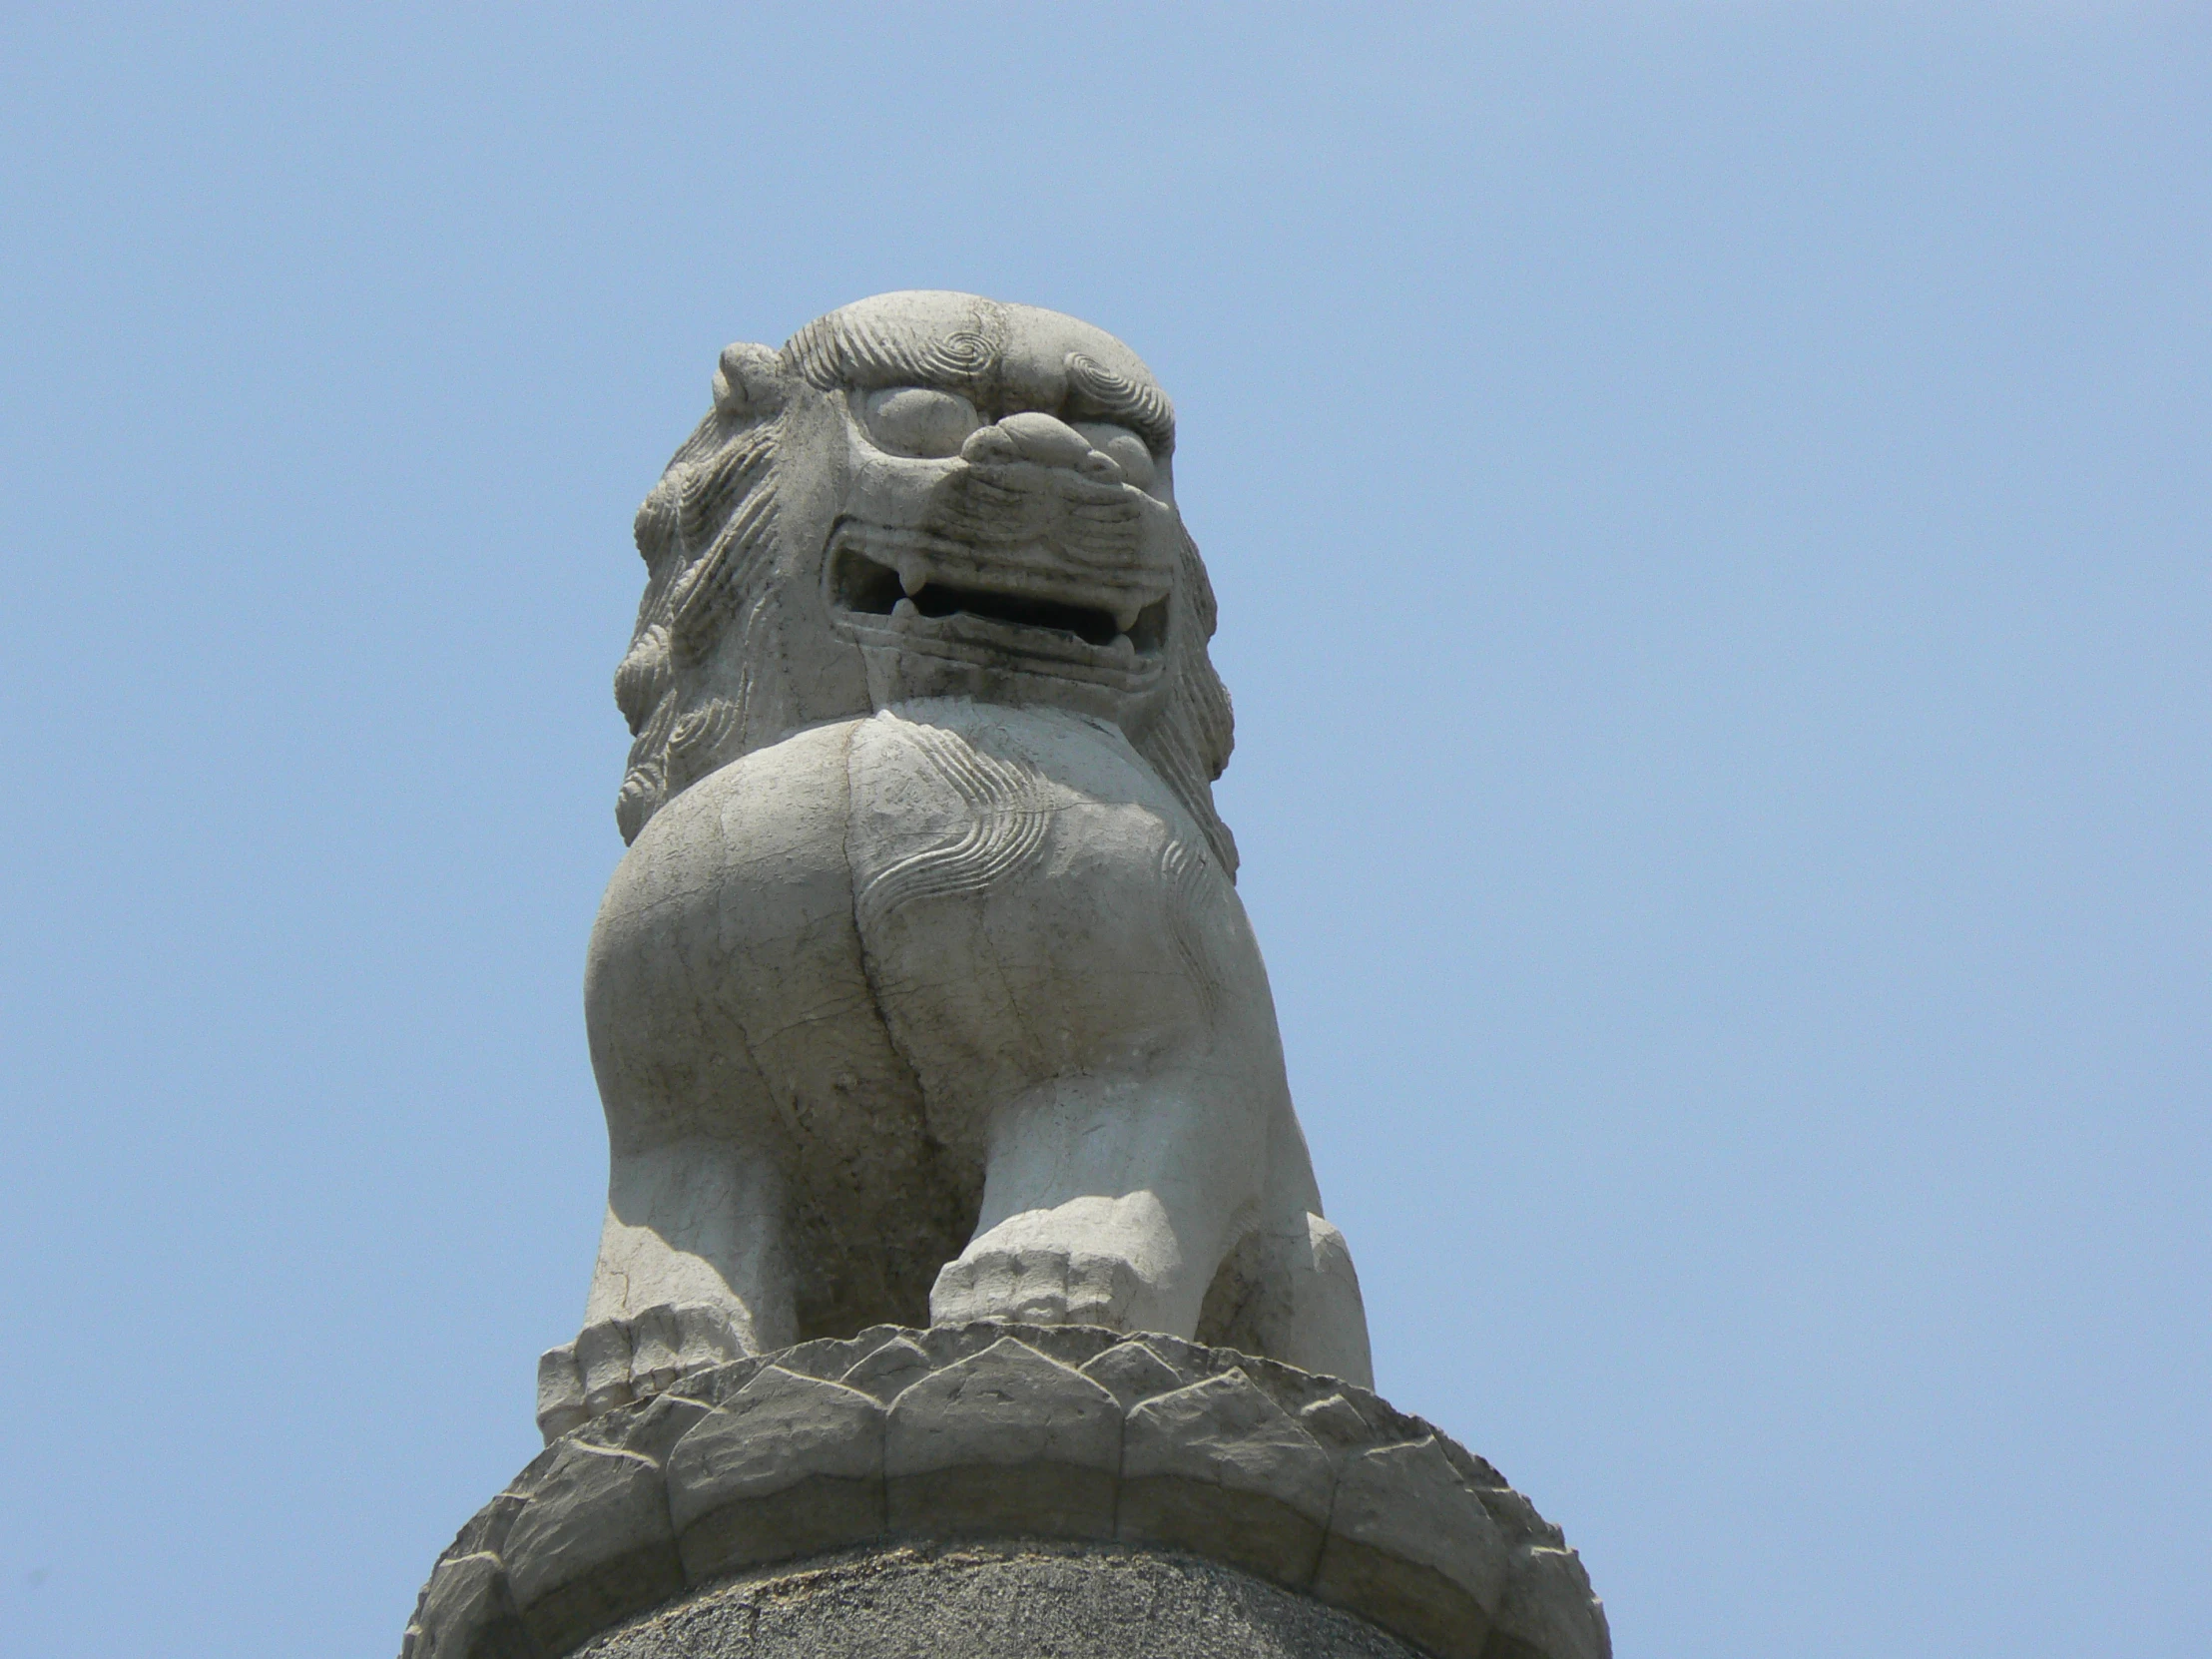 the statue of the stone lion is against the sky